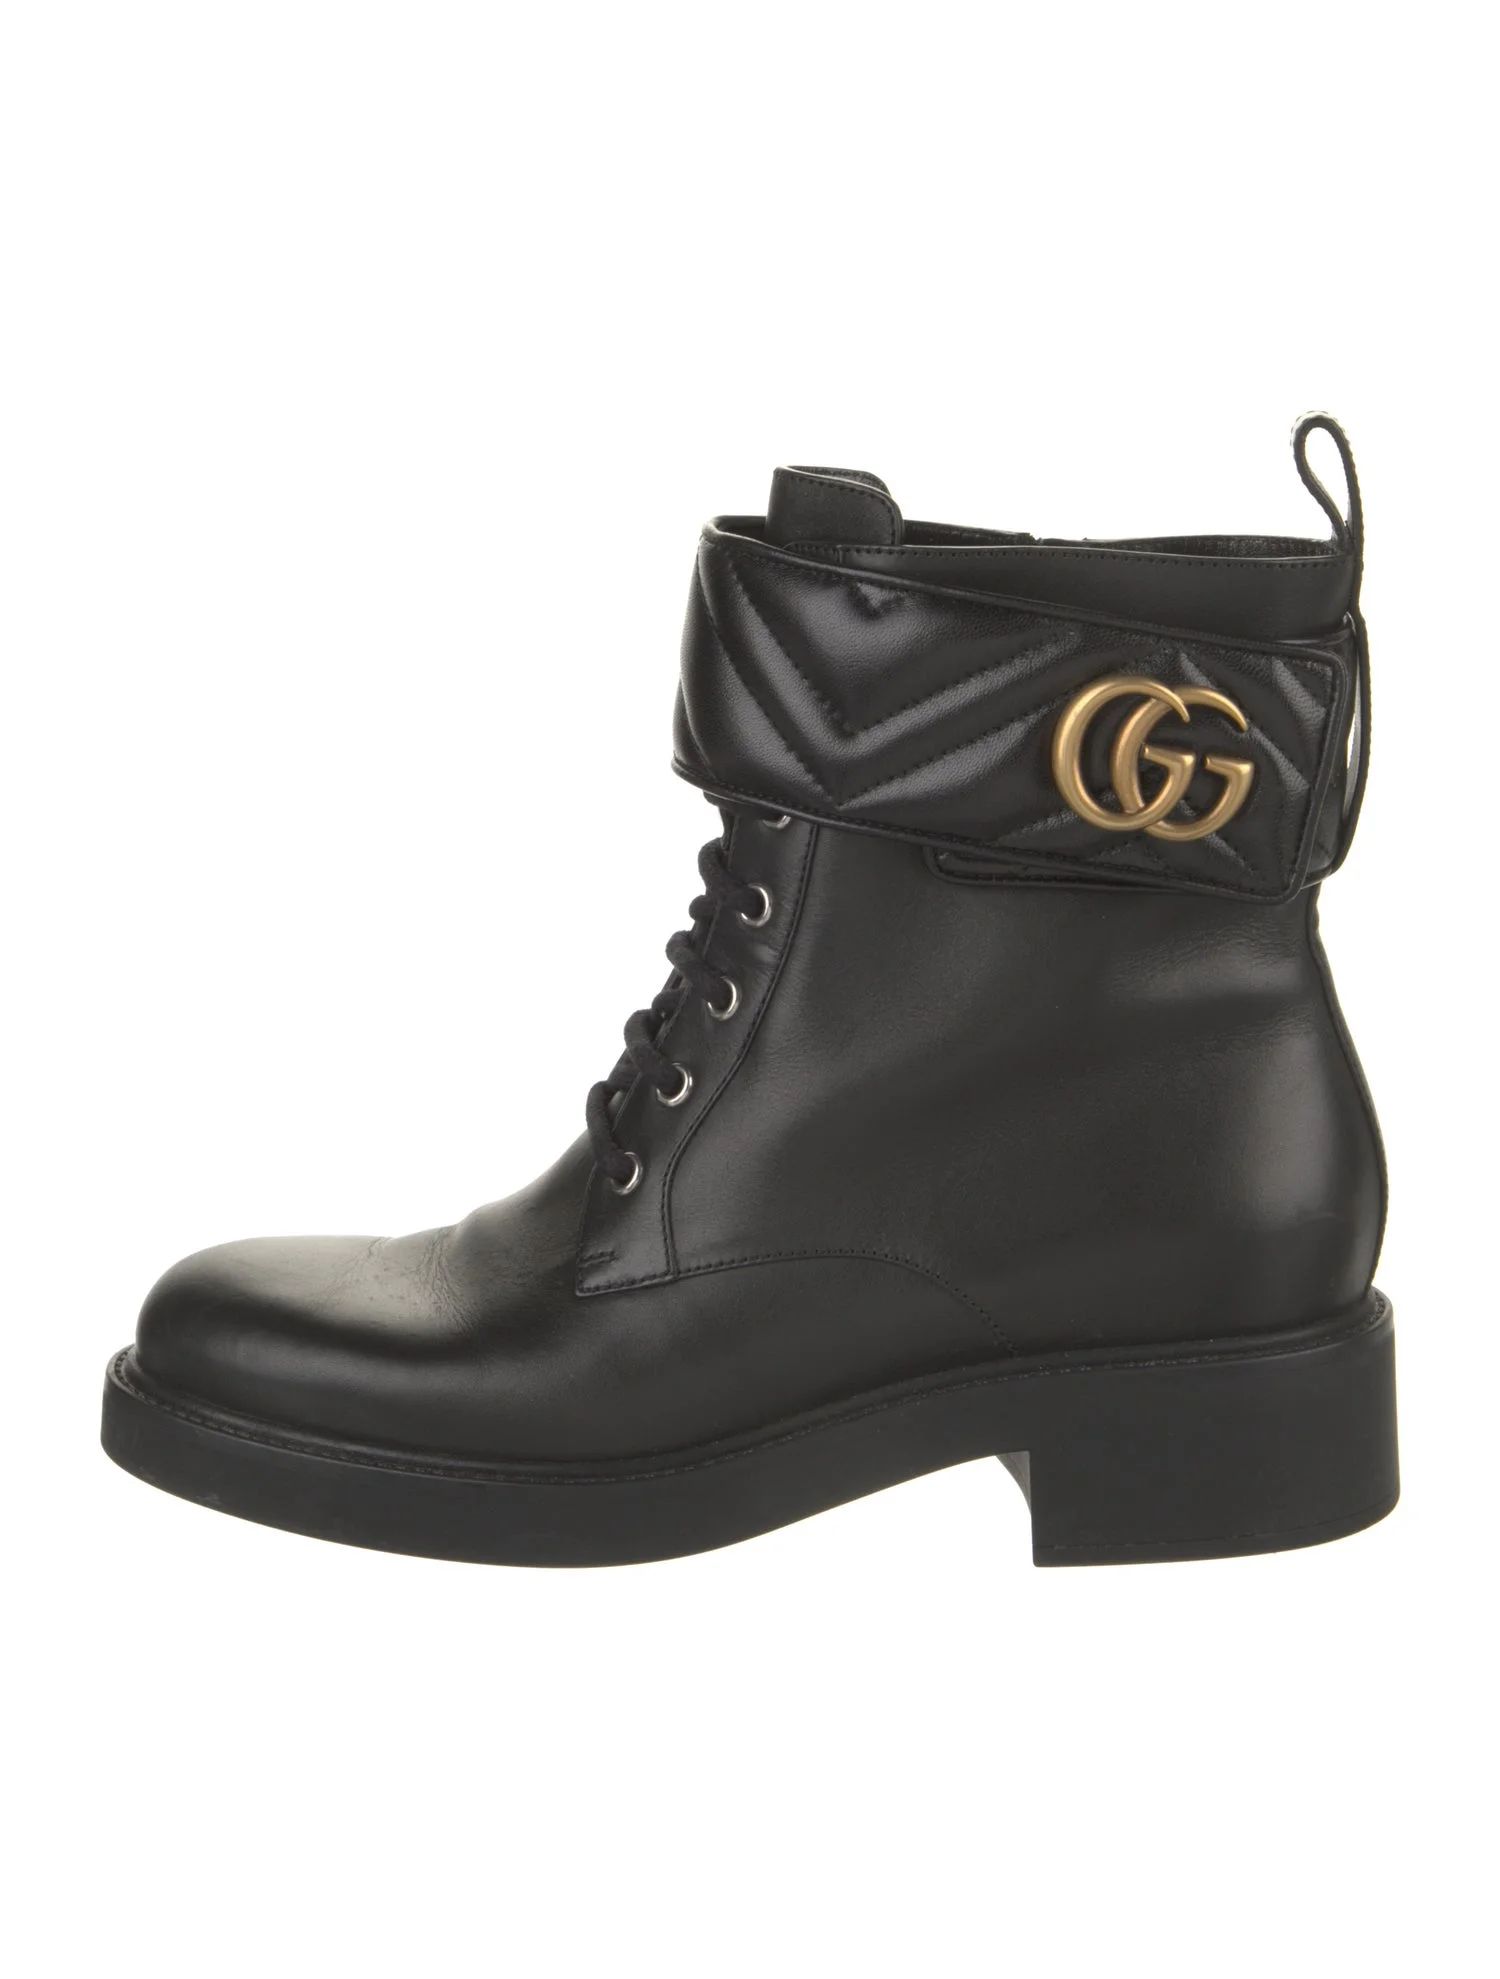 Double G Logo Leather Combat Boots | The RealReal